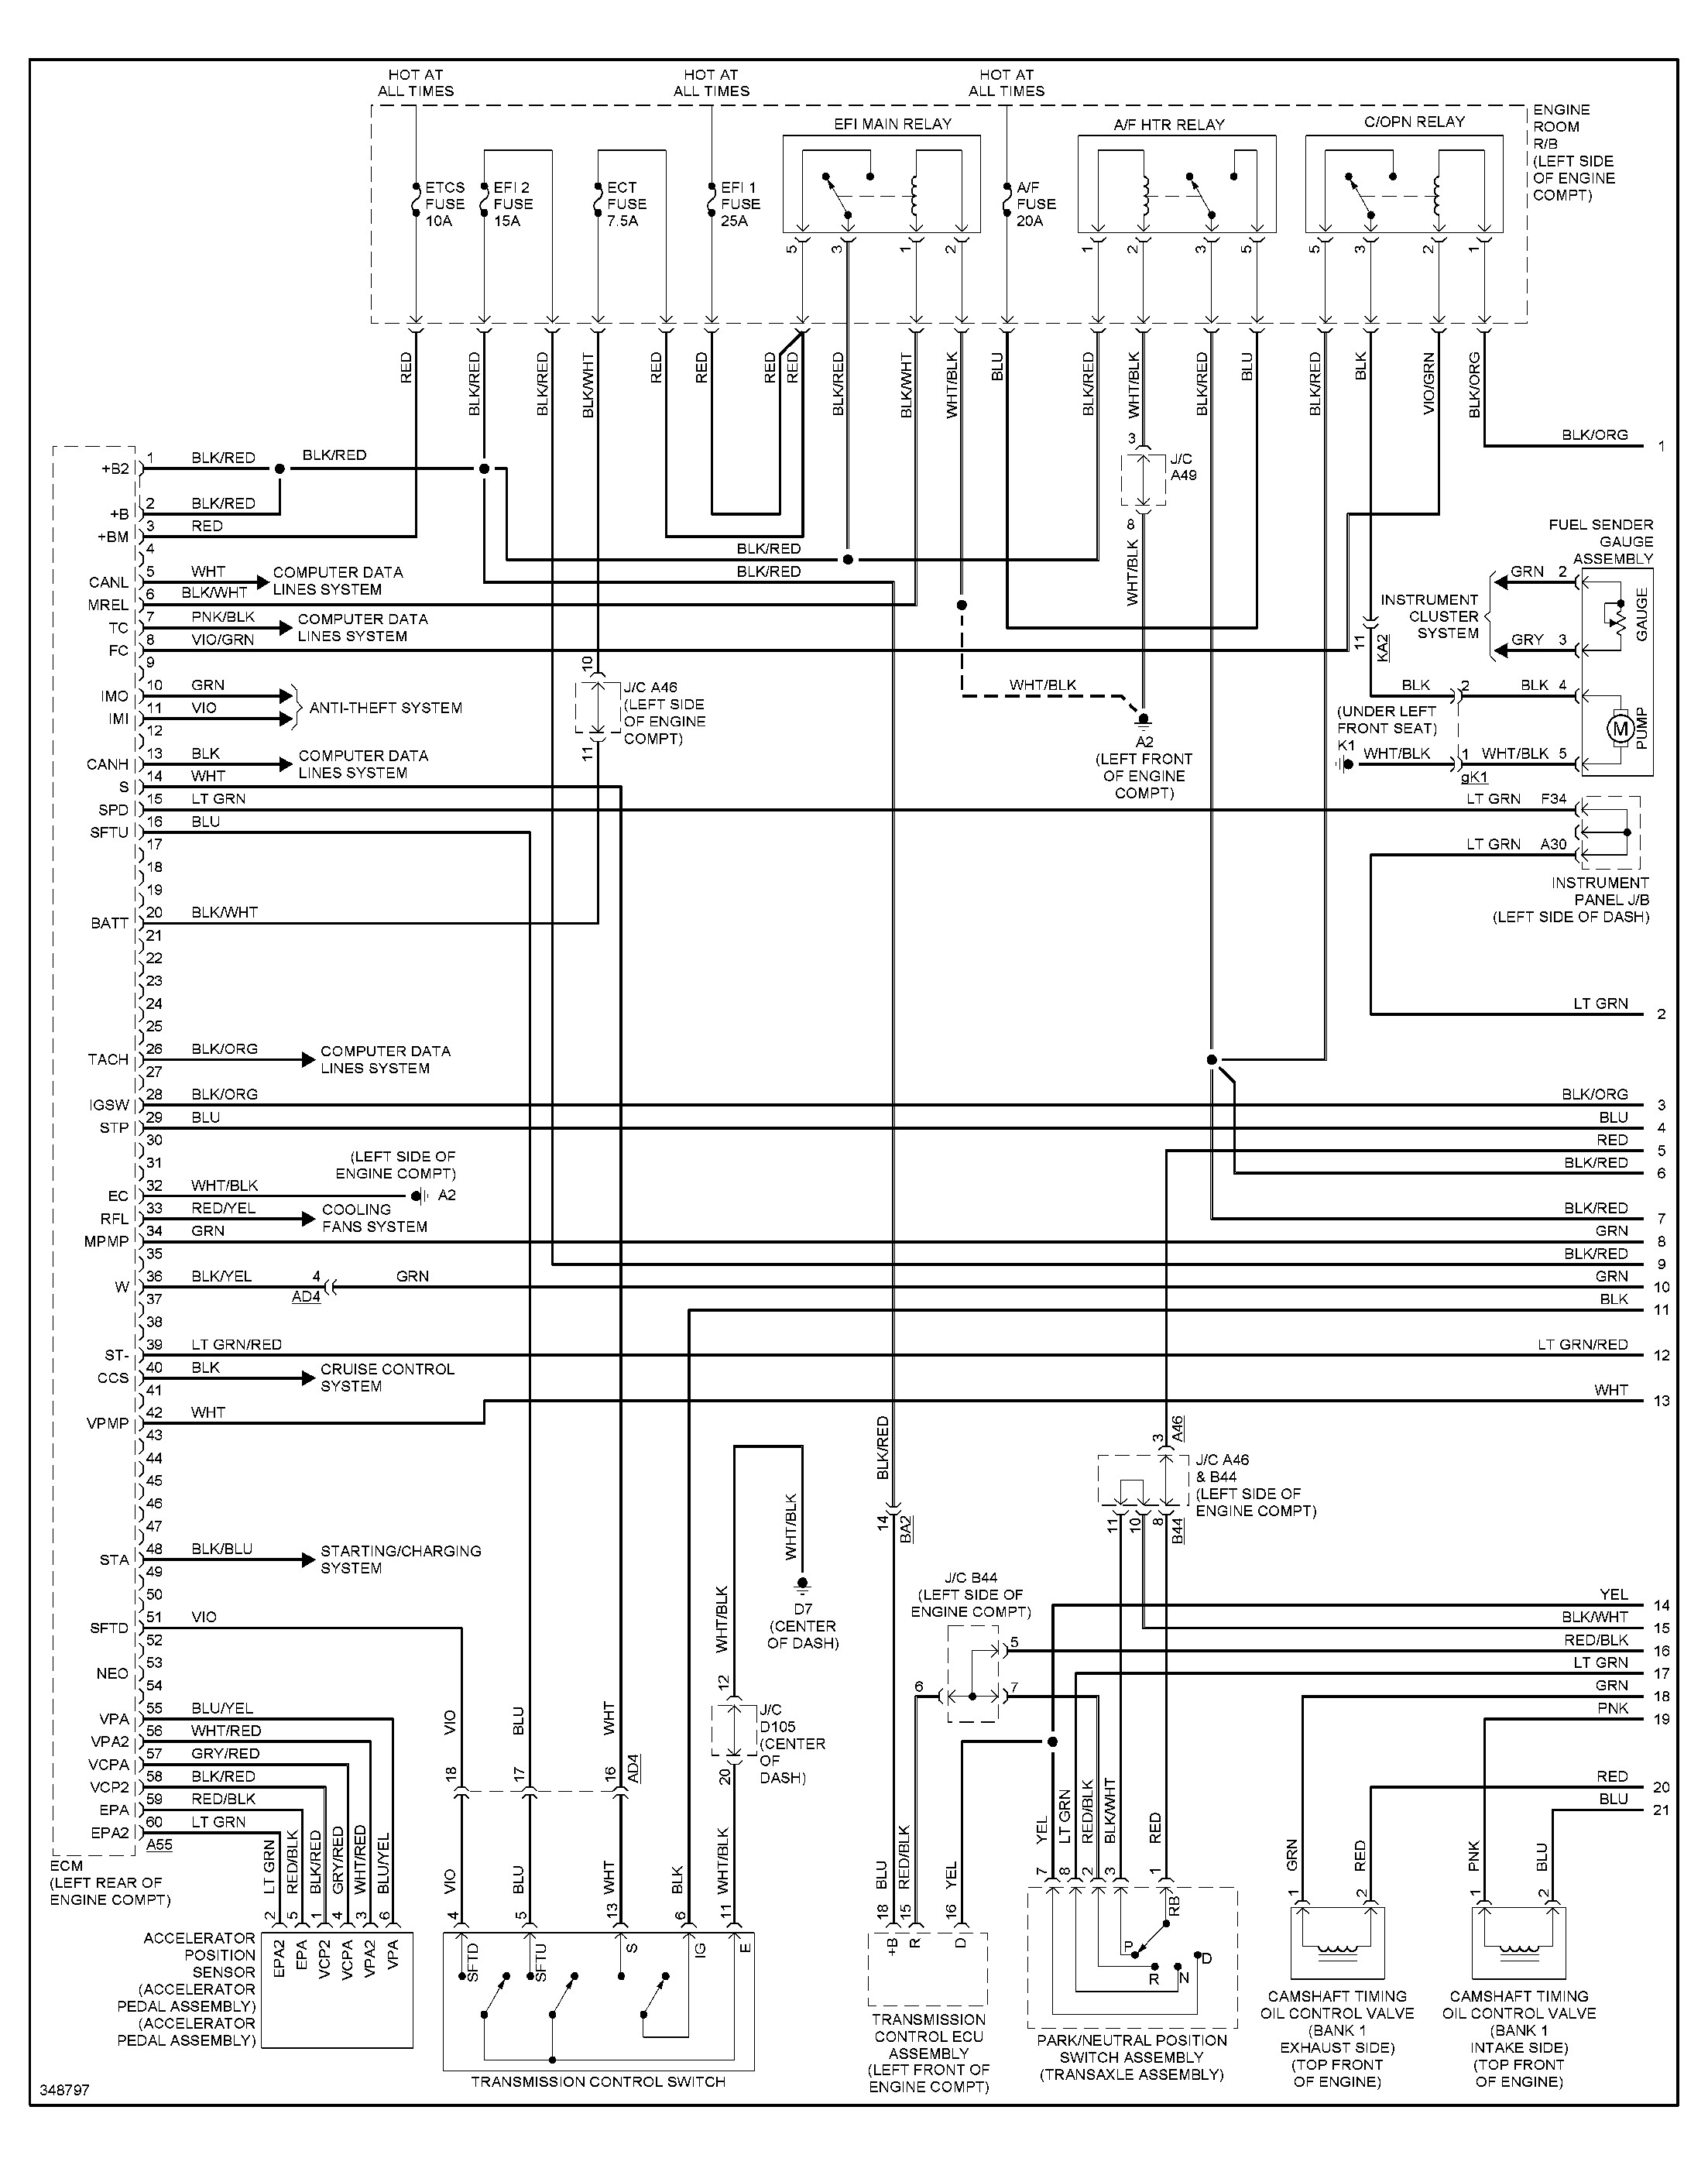 Wiring Diagrams Remote Starter The Diagram With Auto Start Within